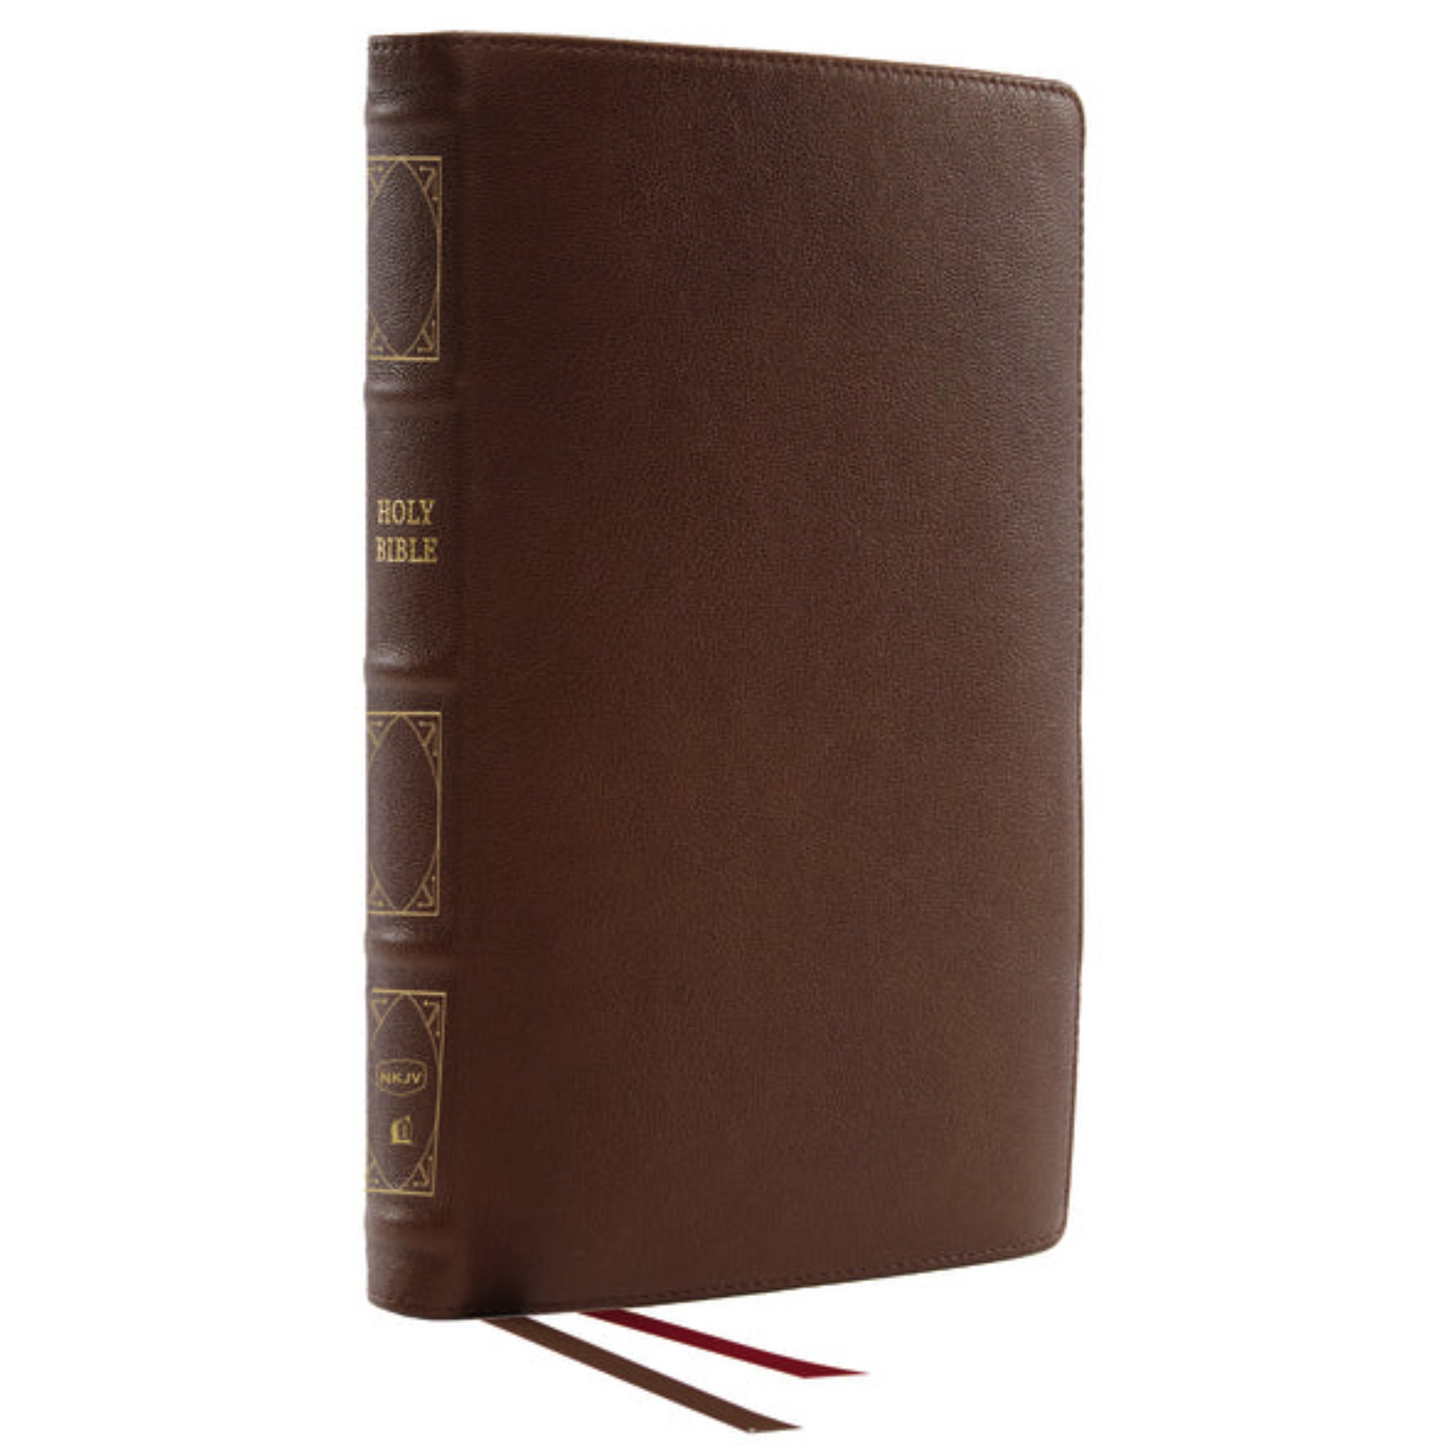 NKJV, Thinline Reference Bible, Genuine Leather, Brown